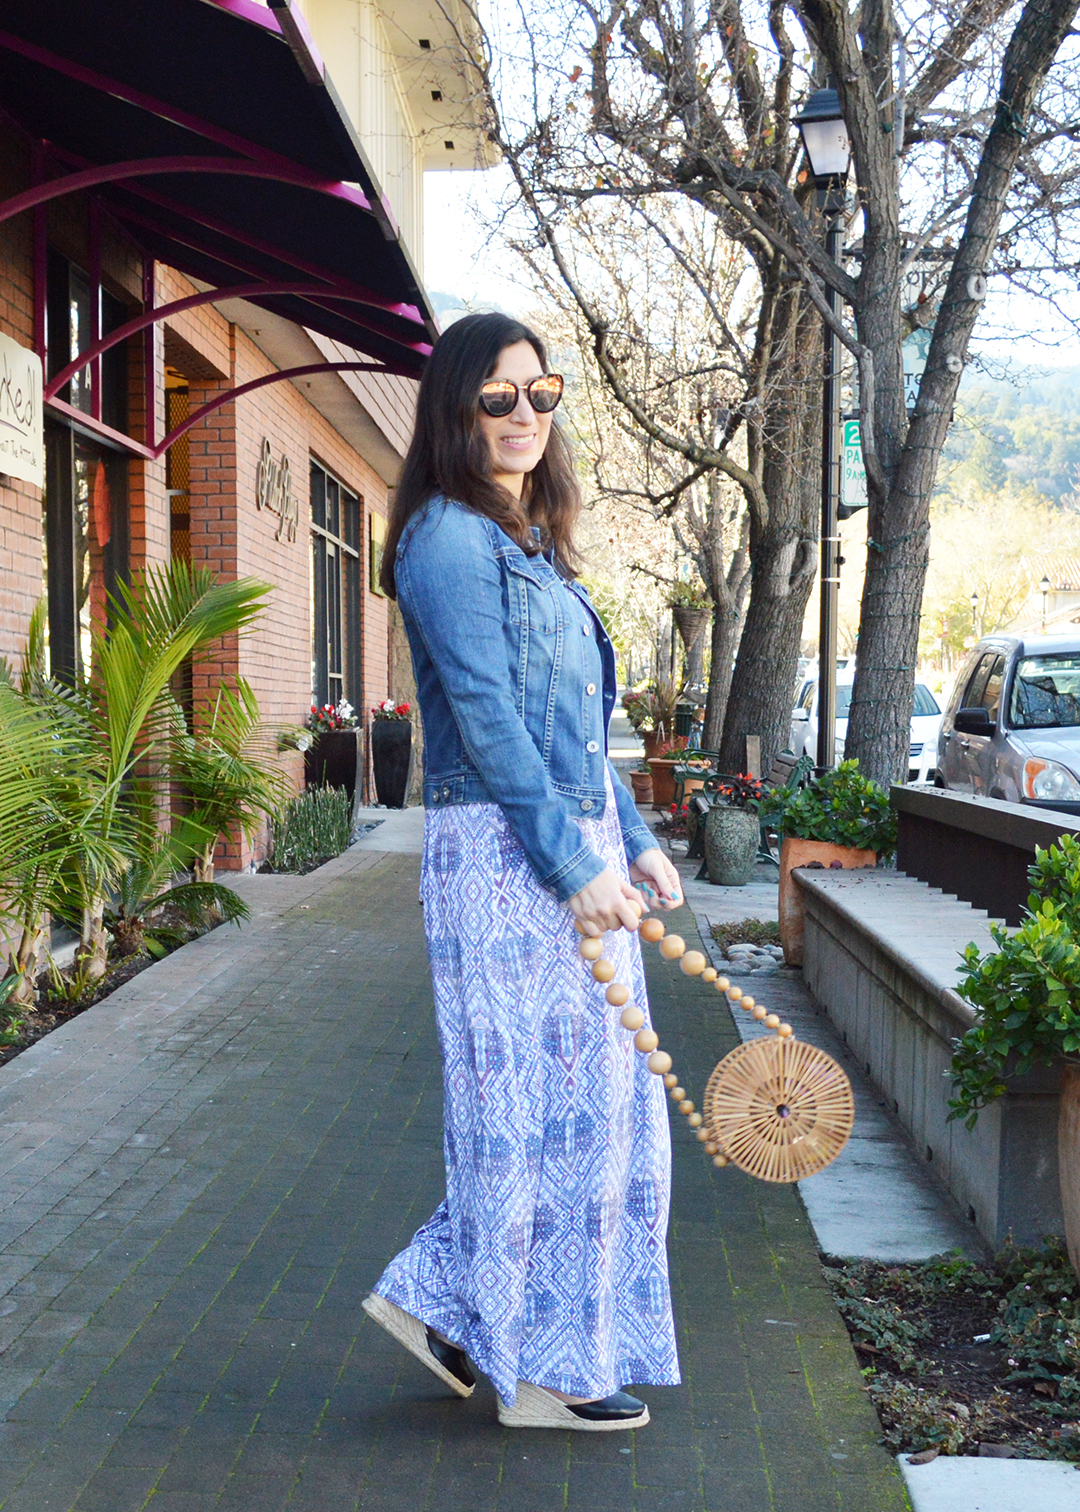 A touch of resort during winter – Bay Area Fashionista